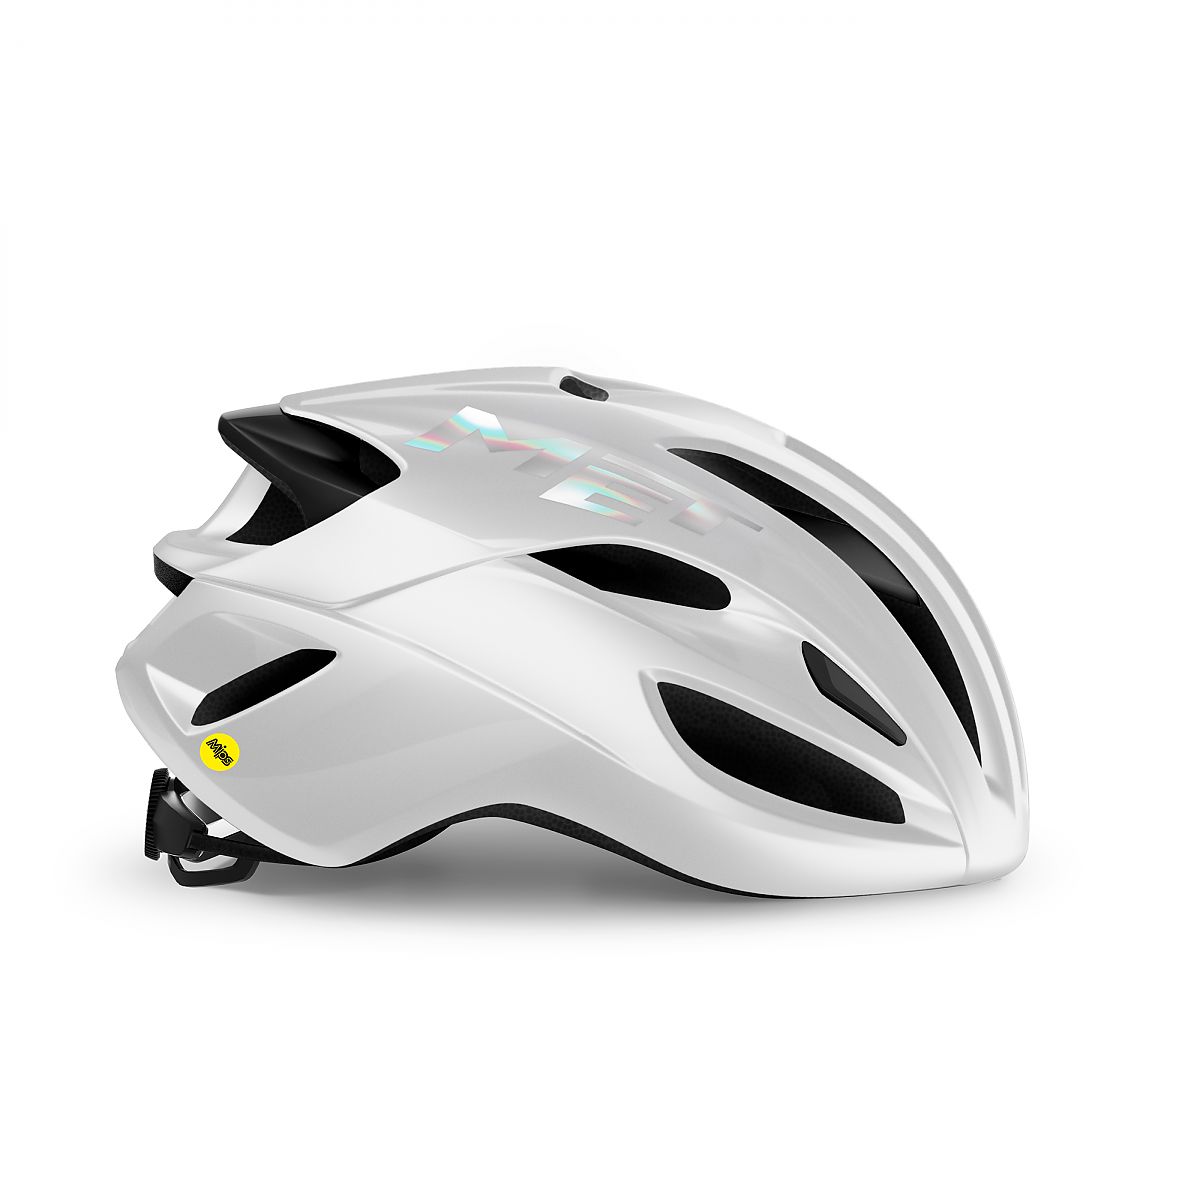 MET releases new Rivale MIPS at $180 | Bicycle Retailer and 